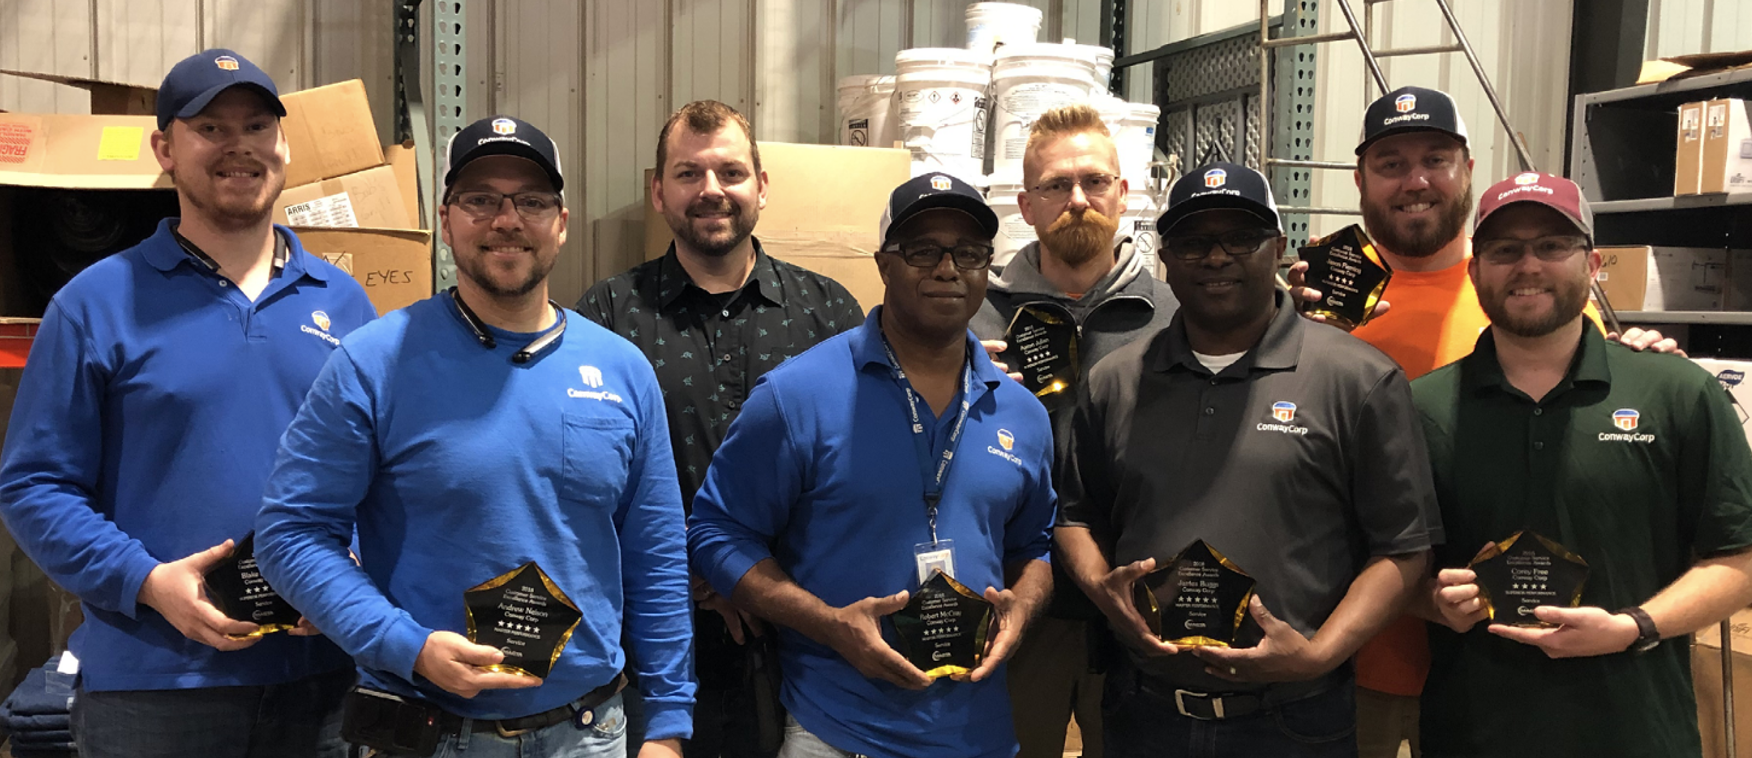 Cable techs recognized for excellent service